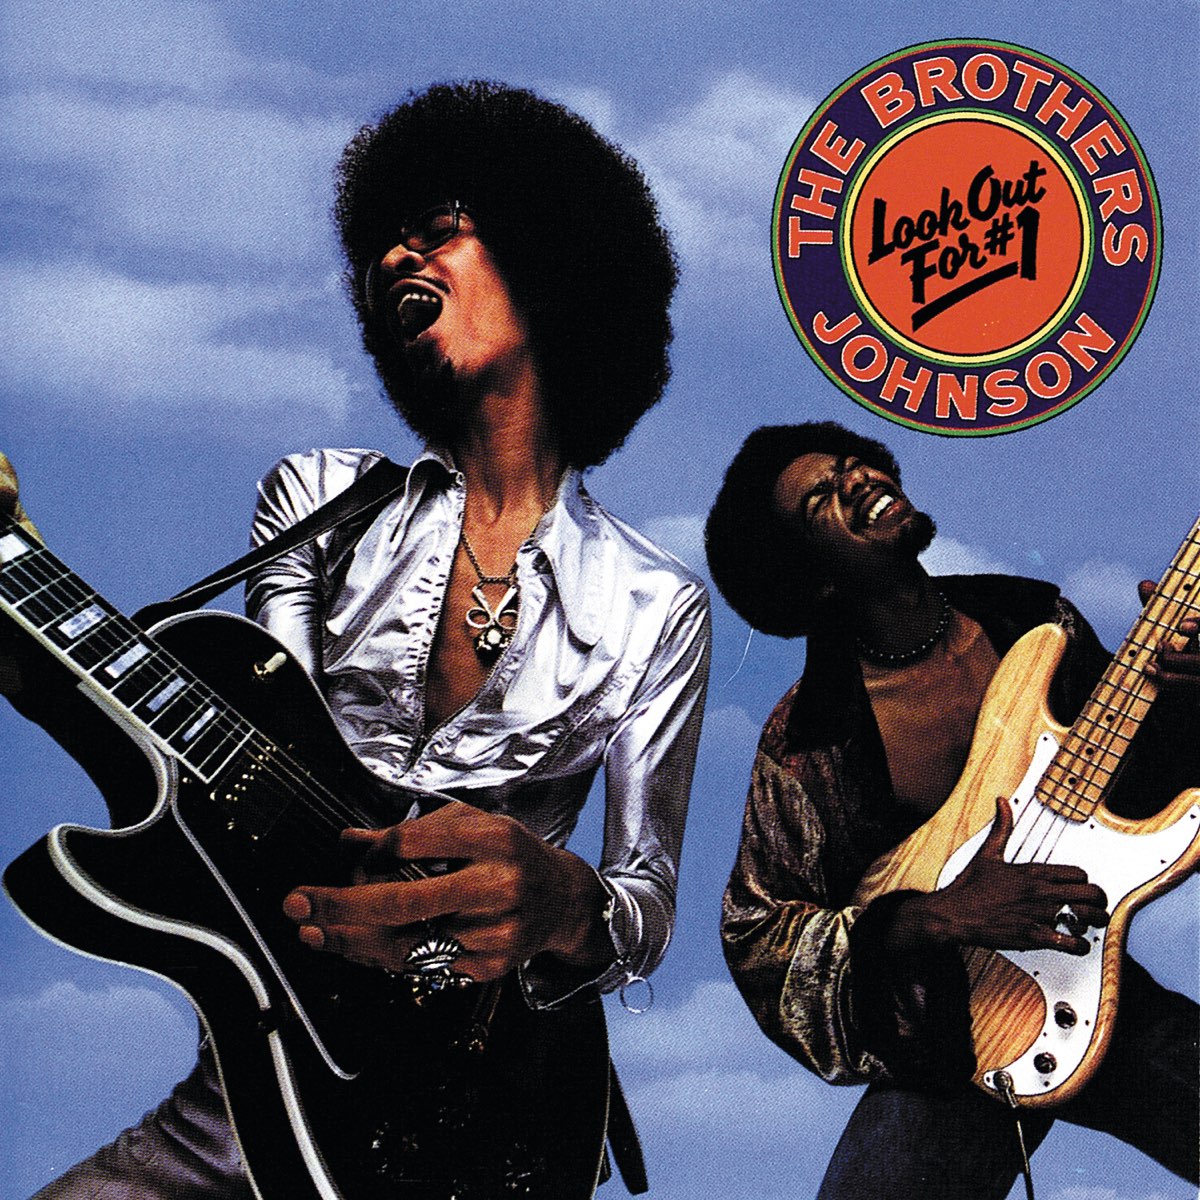 Brothers Johnson Get The Funk Out Ma Face cover artwork